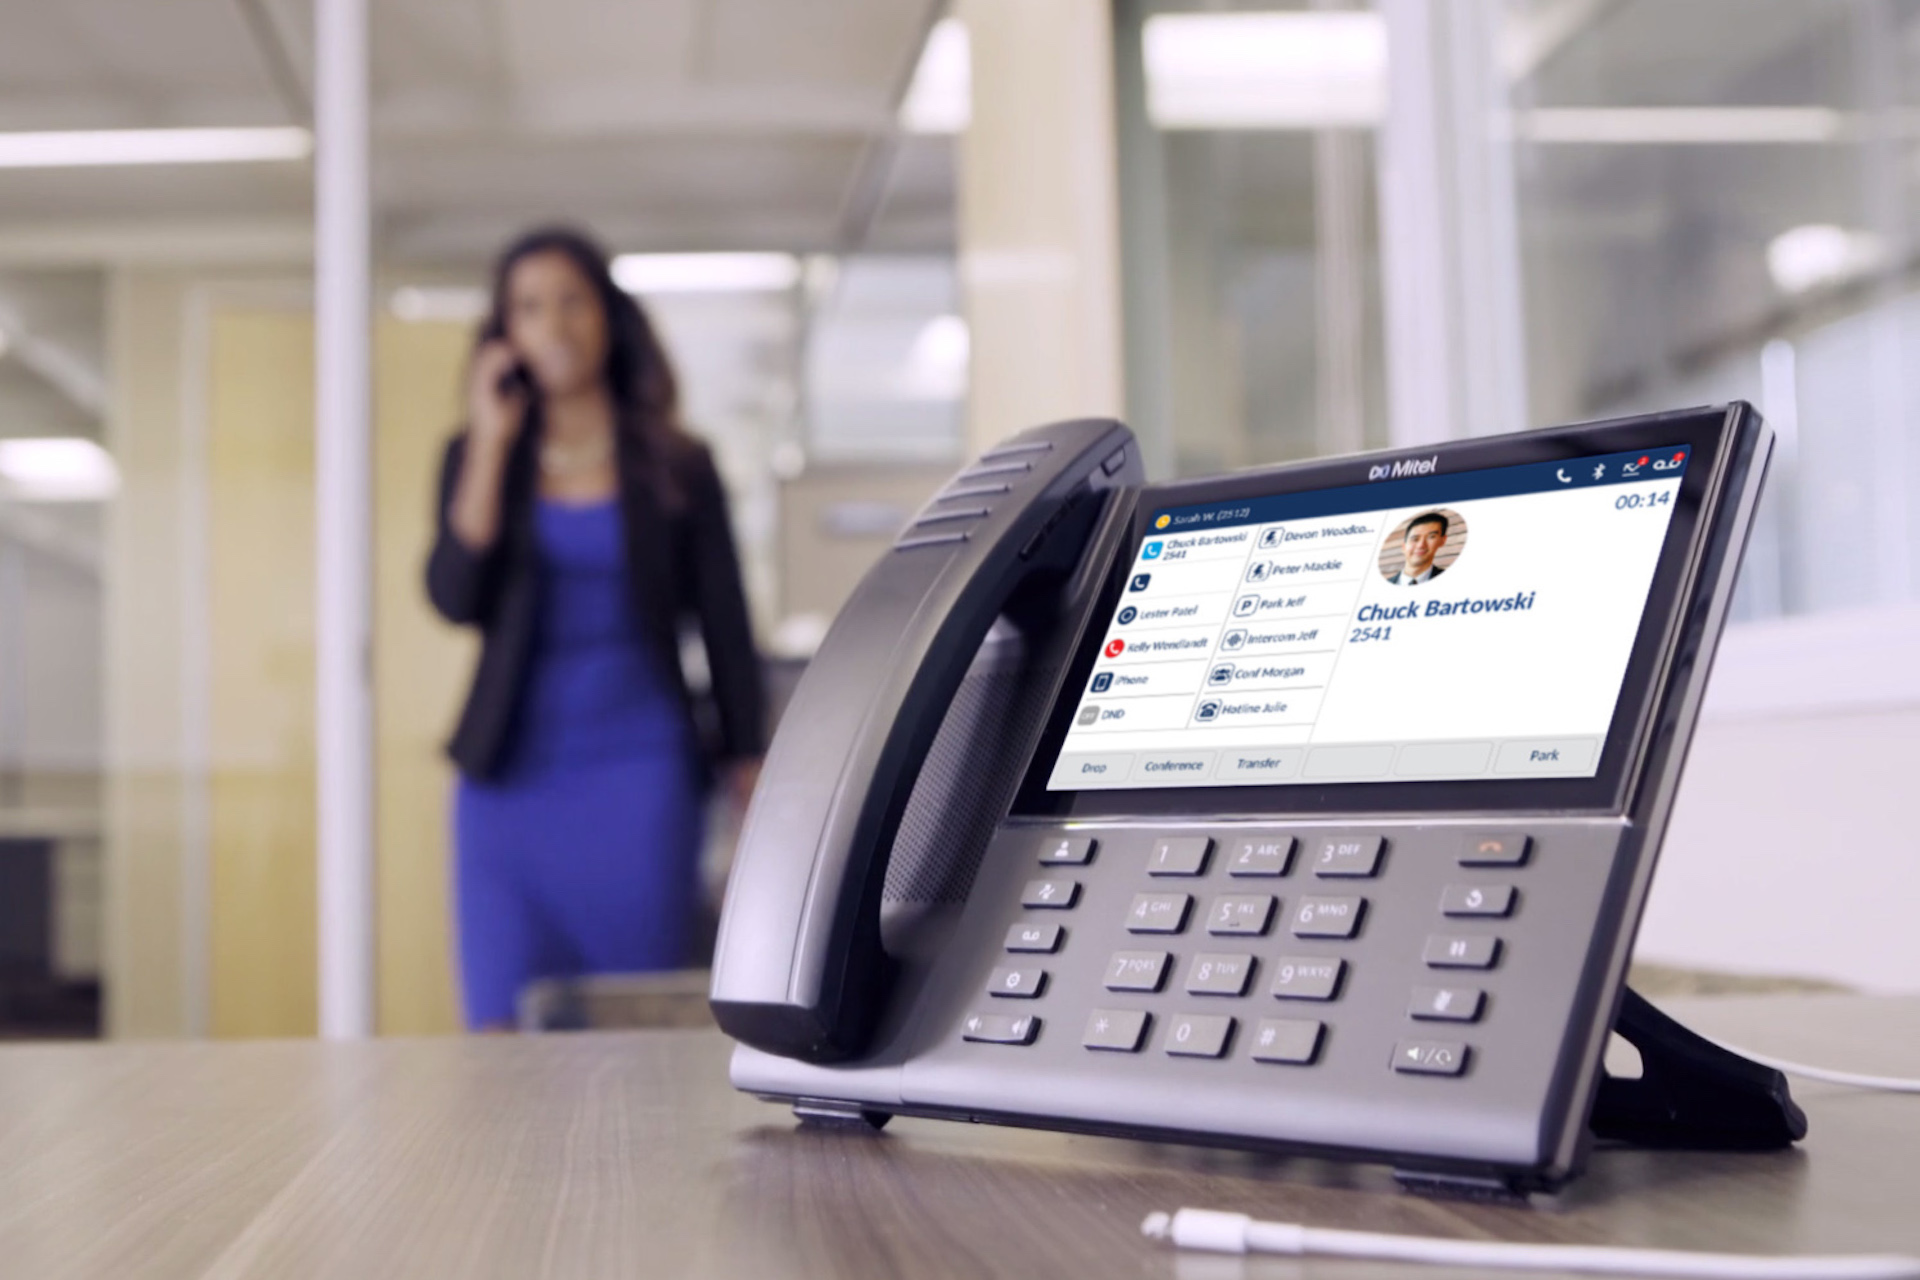 Best Handsets For Avaya Phone systems High Wycombe